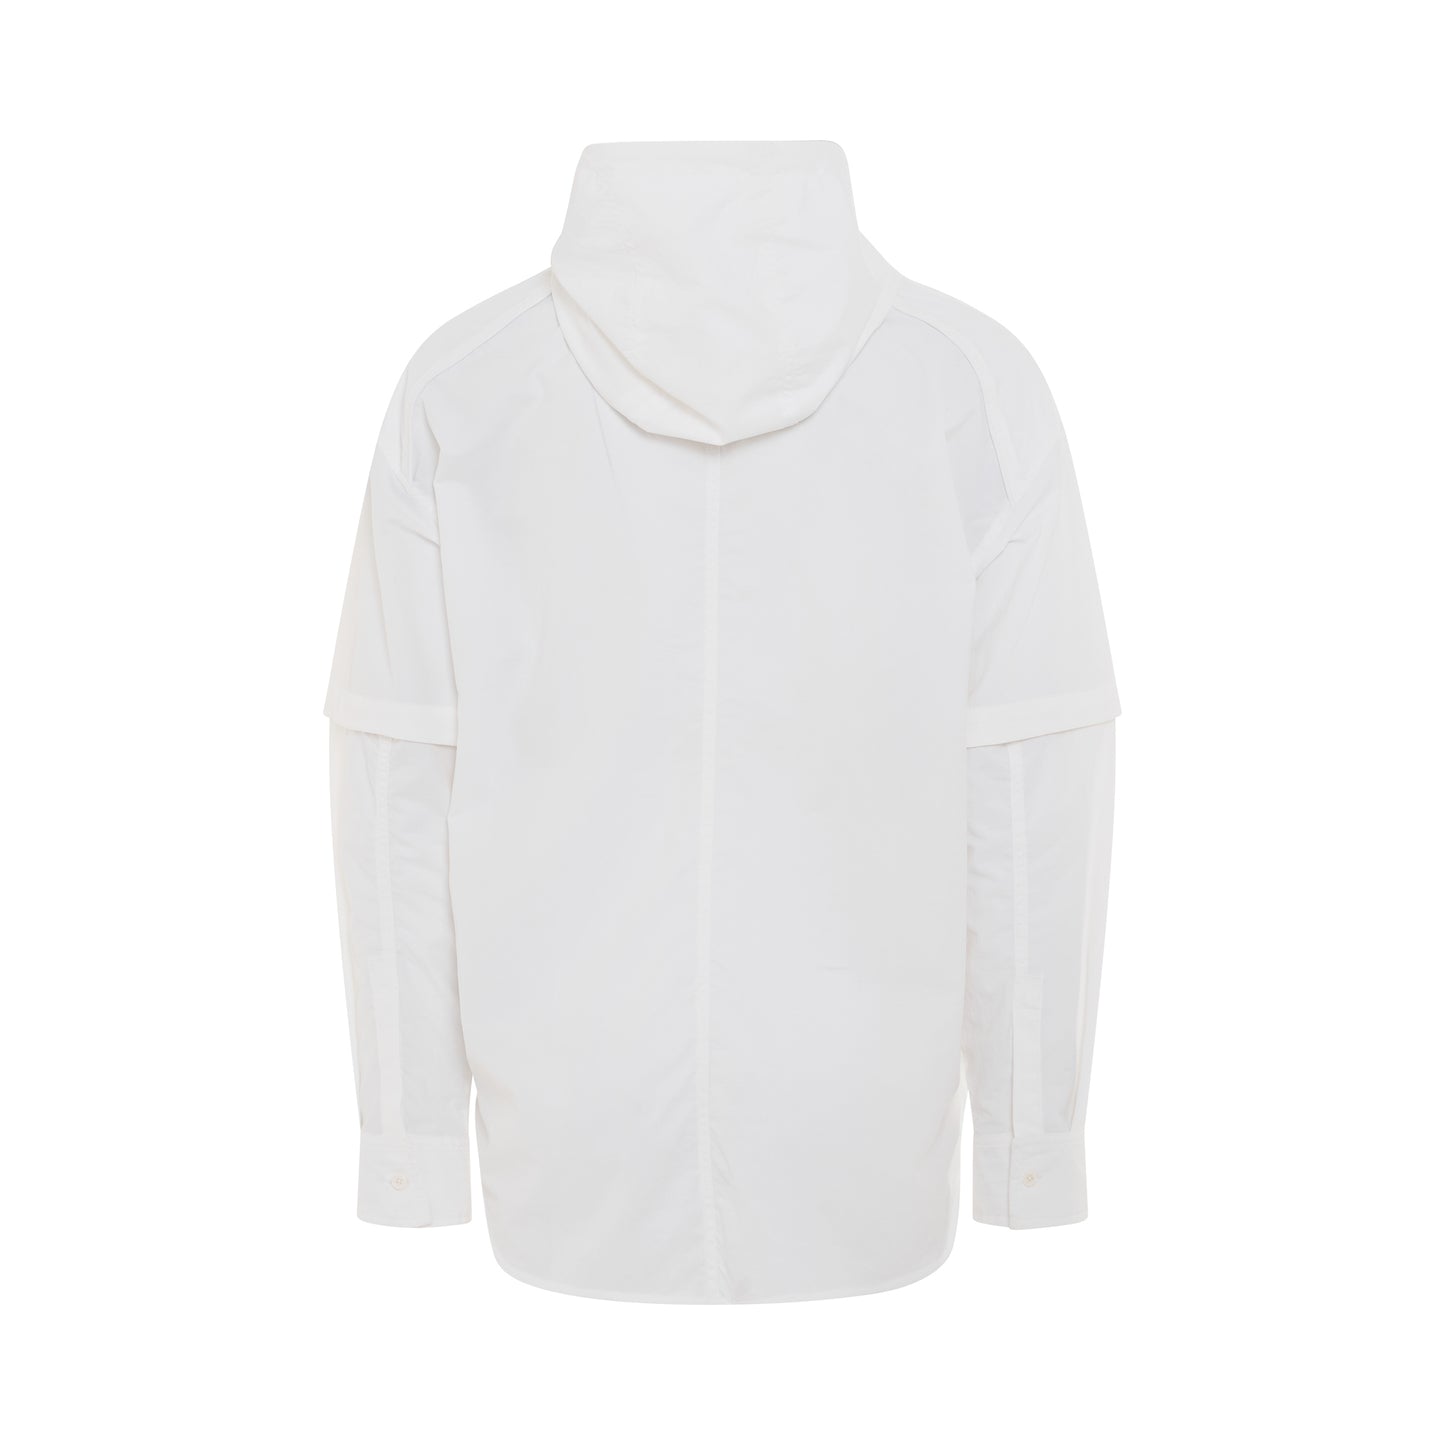 Double Sleeve Shirt Style Hoodie in White